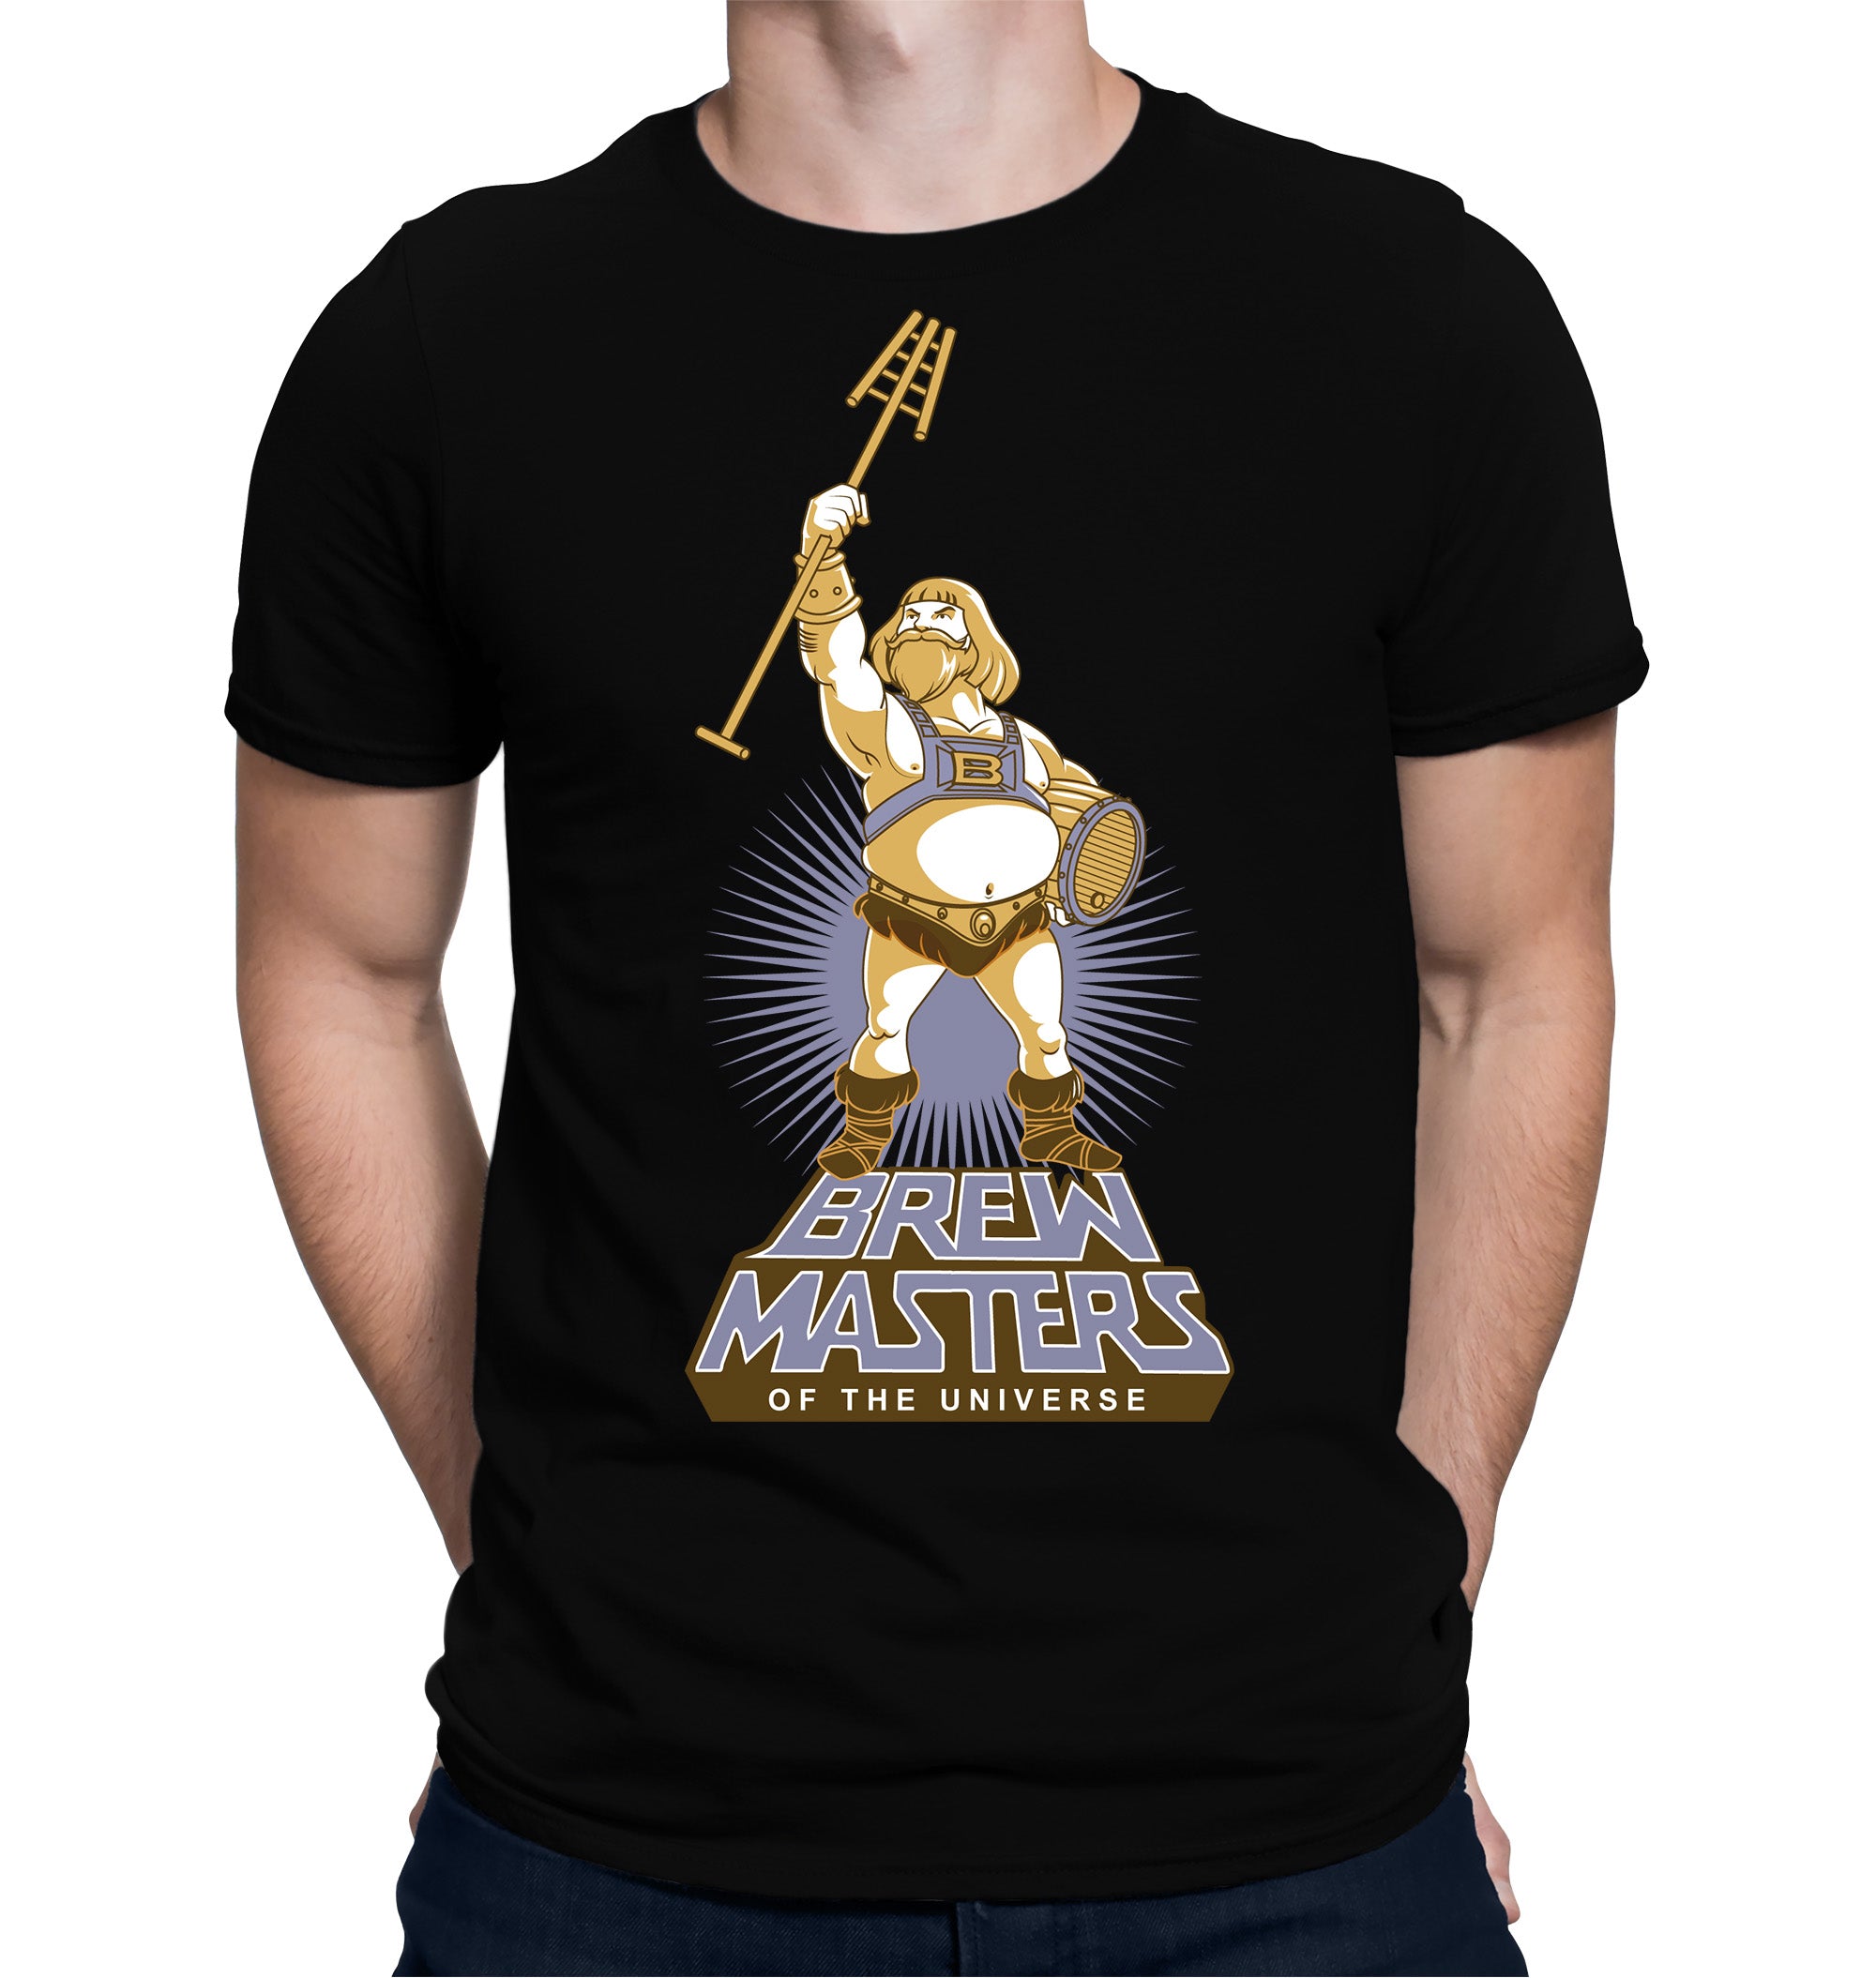 BREWMASTERS_OF_THE_UNIVERSE_HOMEBREWING_T-SHIRT_2000x.jpg